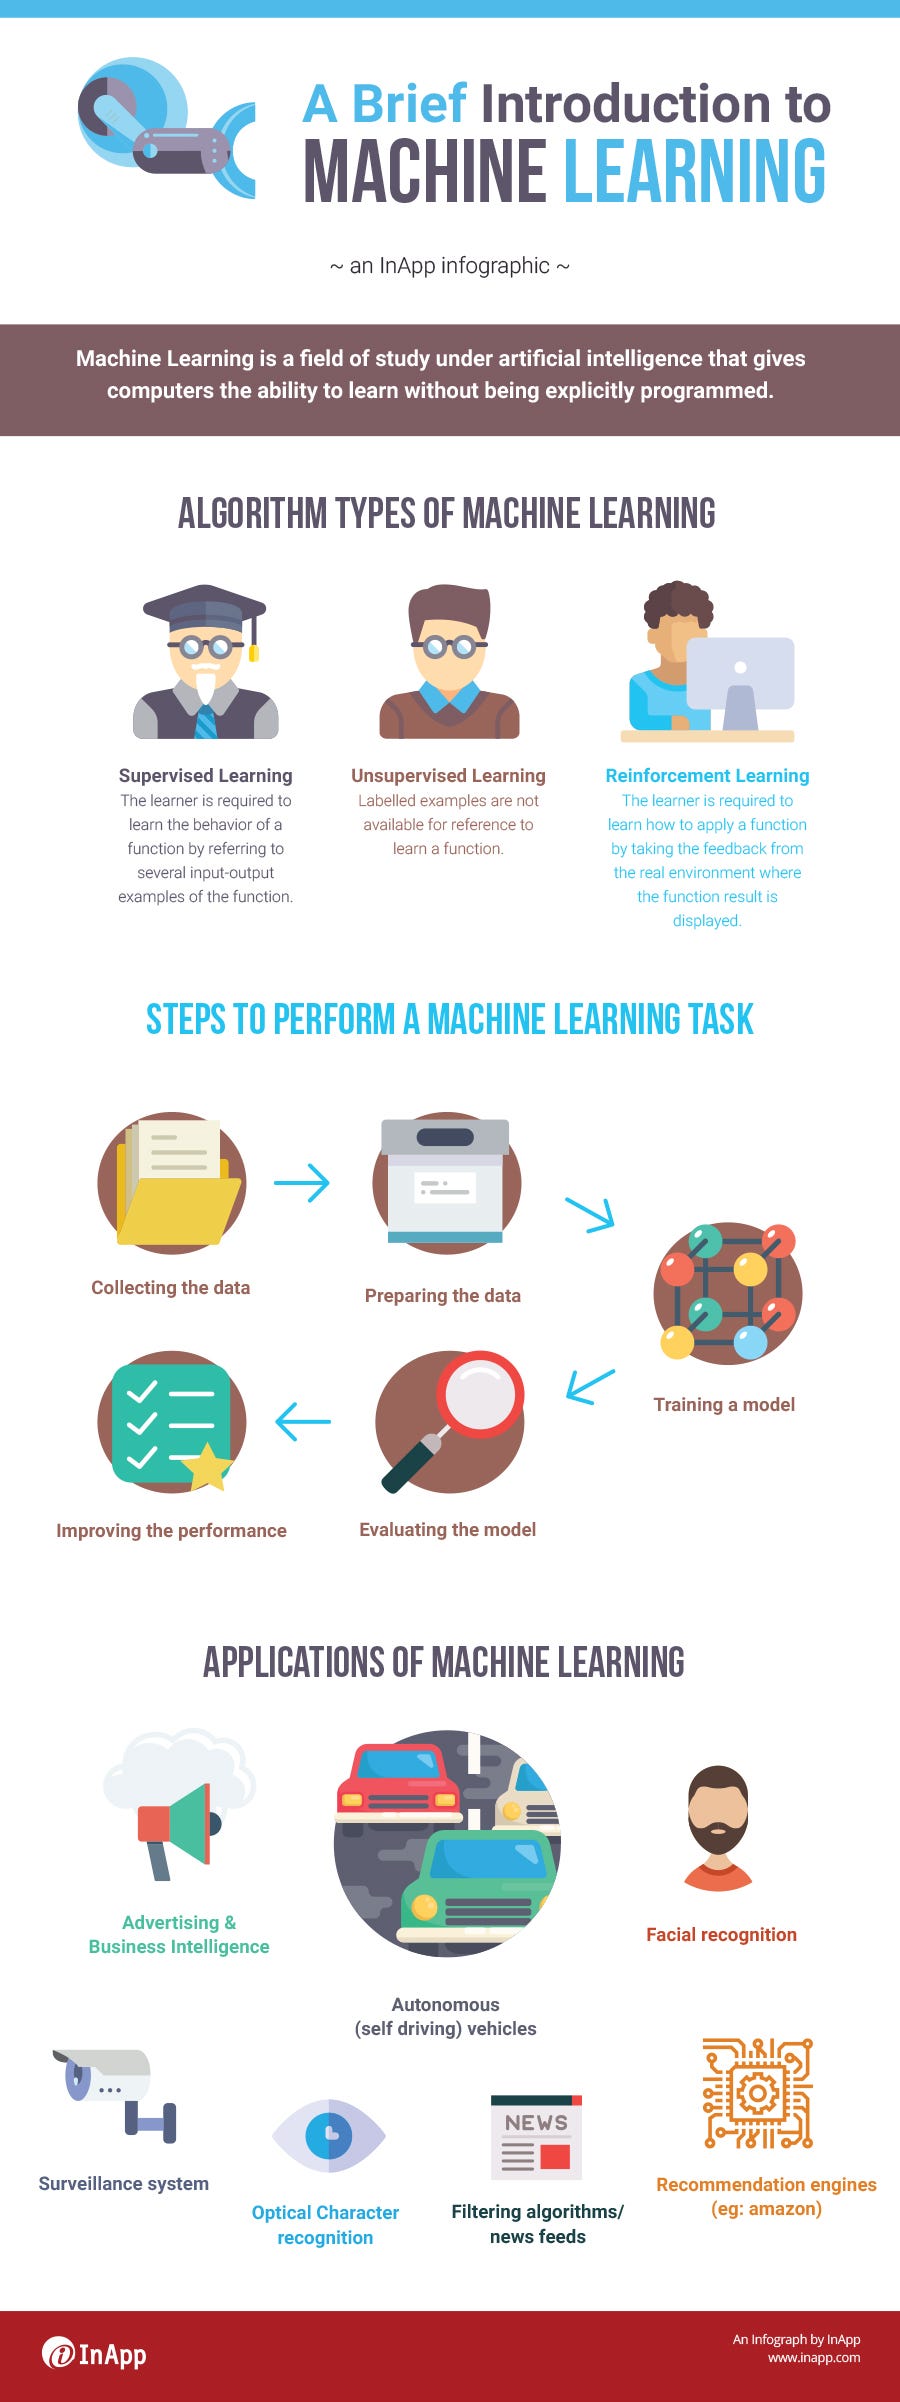 Introduction to Machine Learning,Introduction to ML,Machine Learning Infographic,ML Infographic,Applications of Machine Learning,Introduction to ML and AI,Machine Learning Algorithms Infographic,AI and Machine Learning Infographic